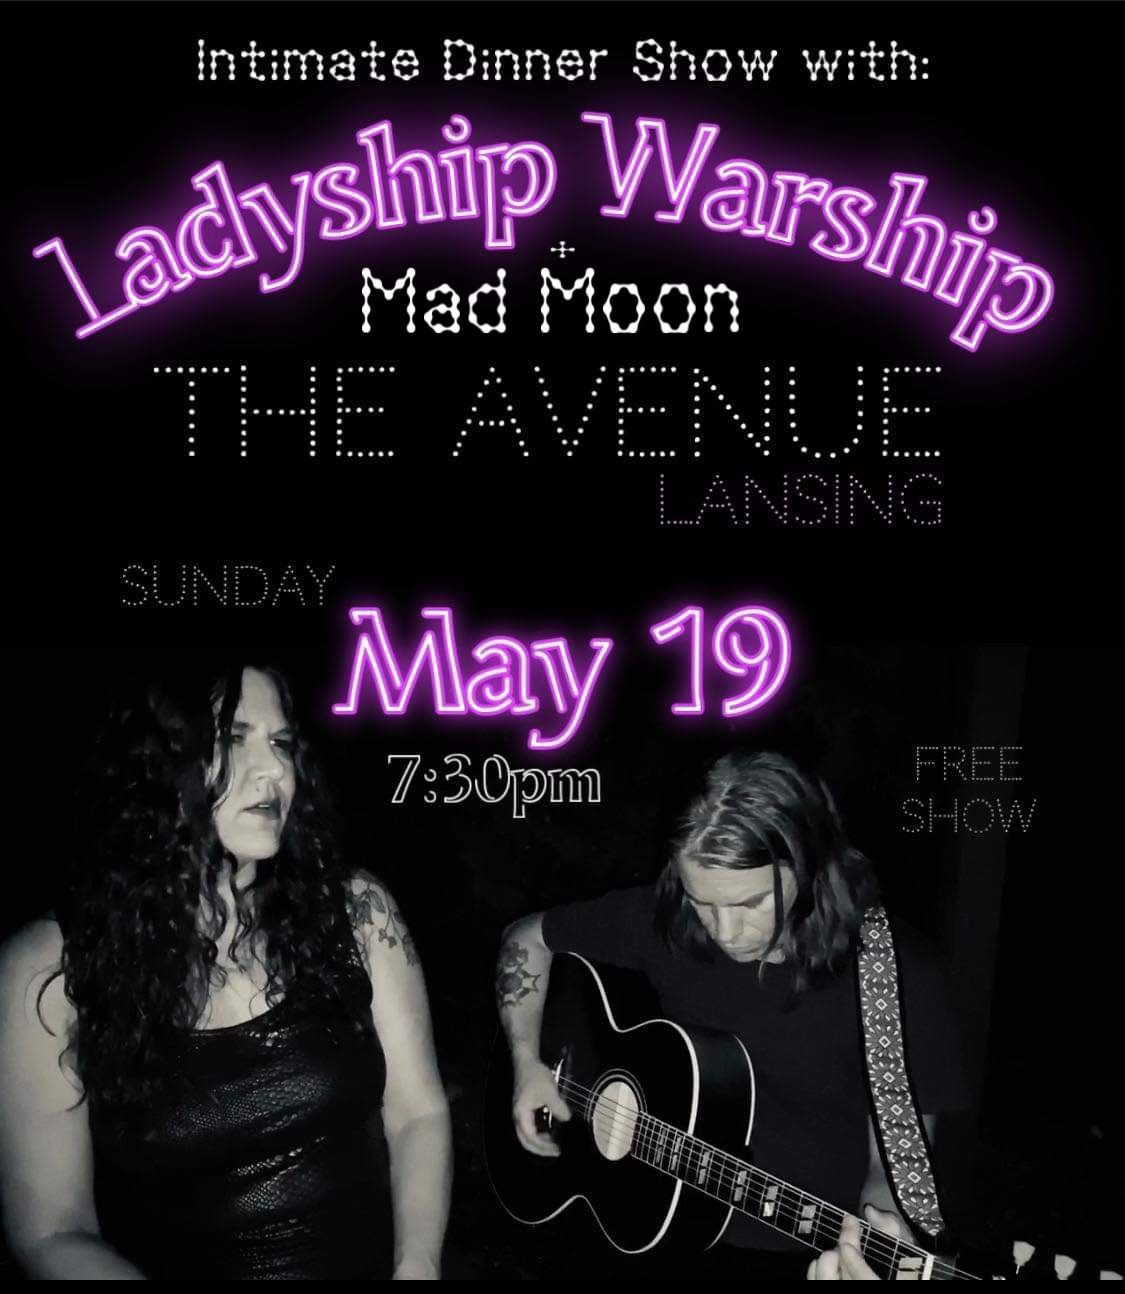 Ladyship Warship + Mad Moon - Stripped Down Sunday Show at The Avenue